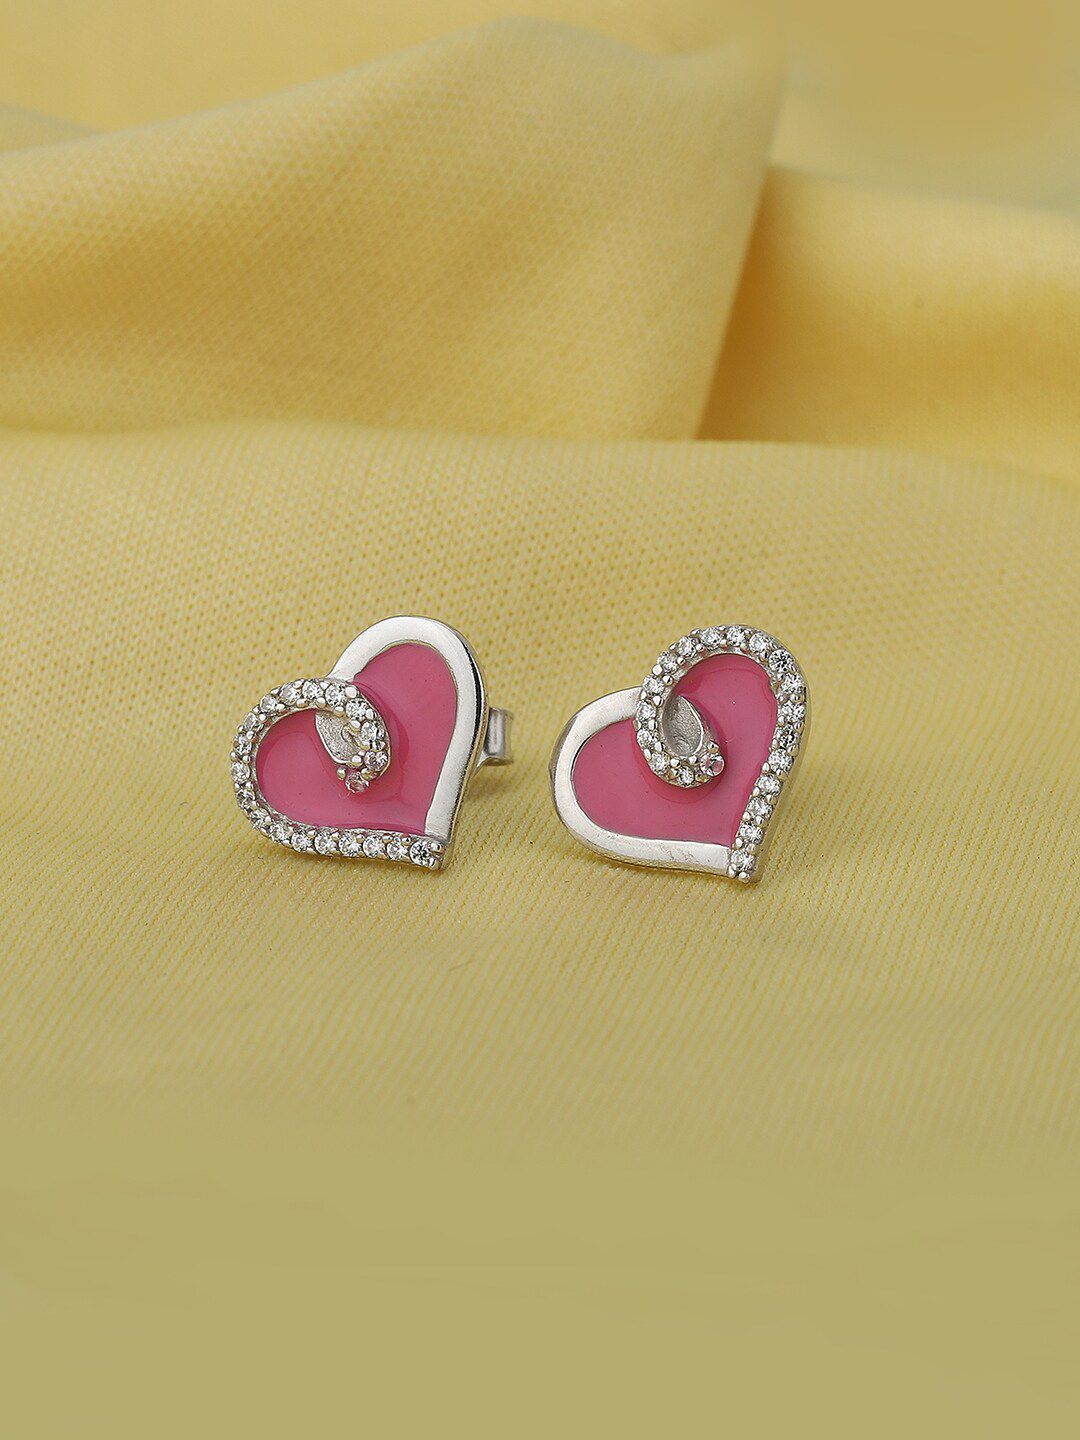 VANBELLE Silver-Toned Heart Shaped Studs Earrings Price in India